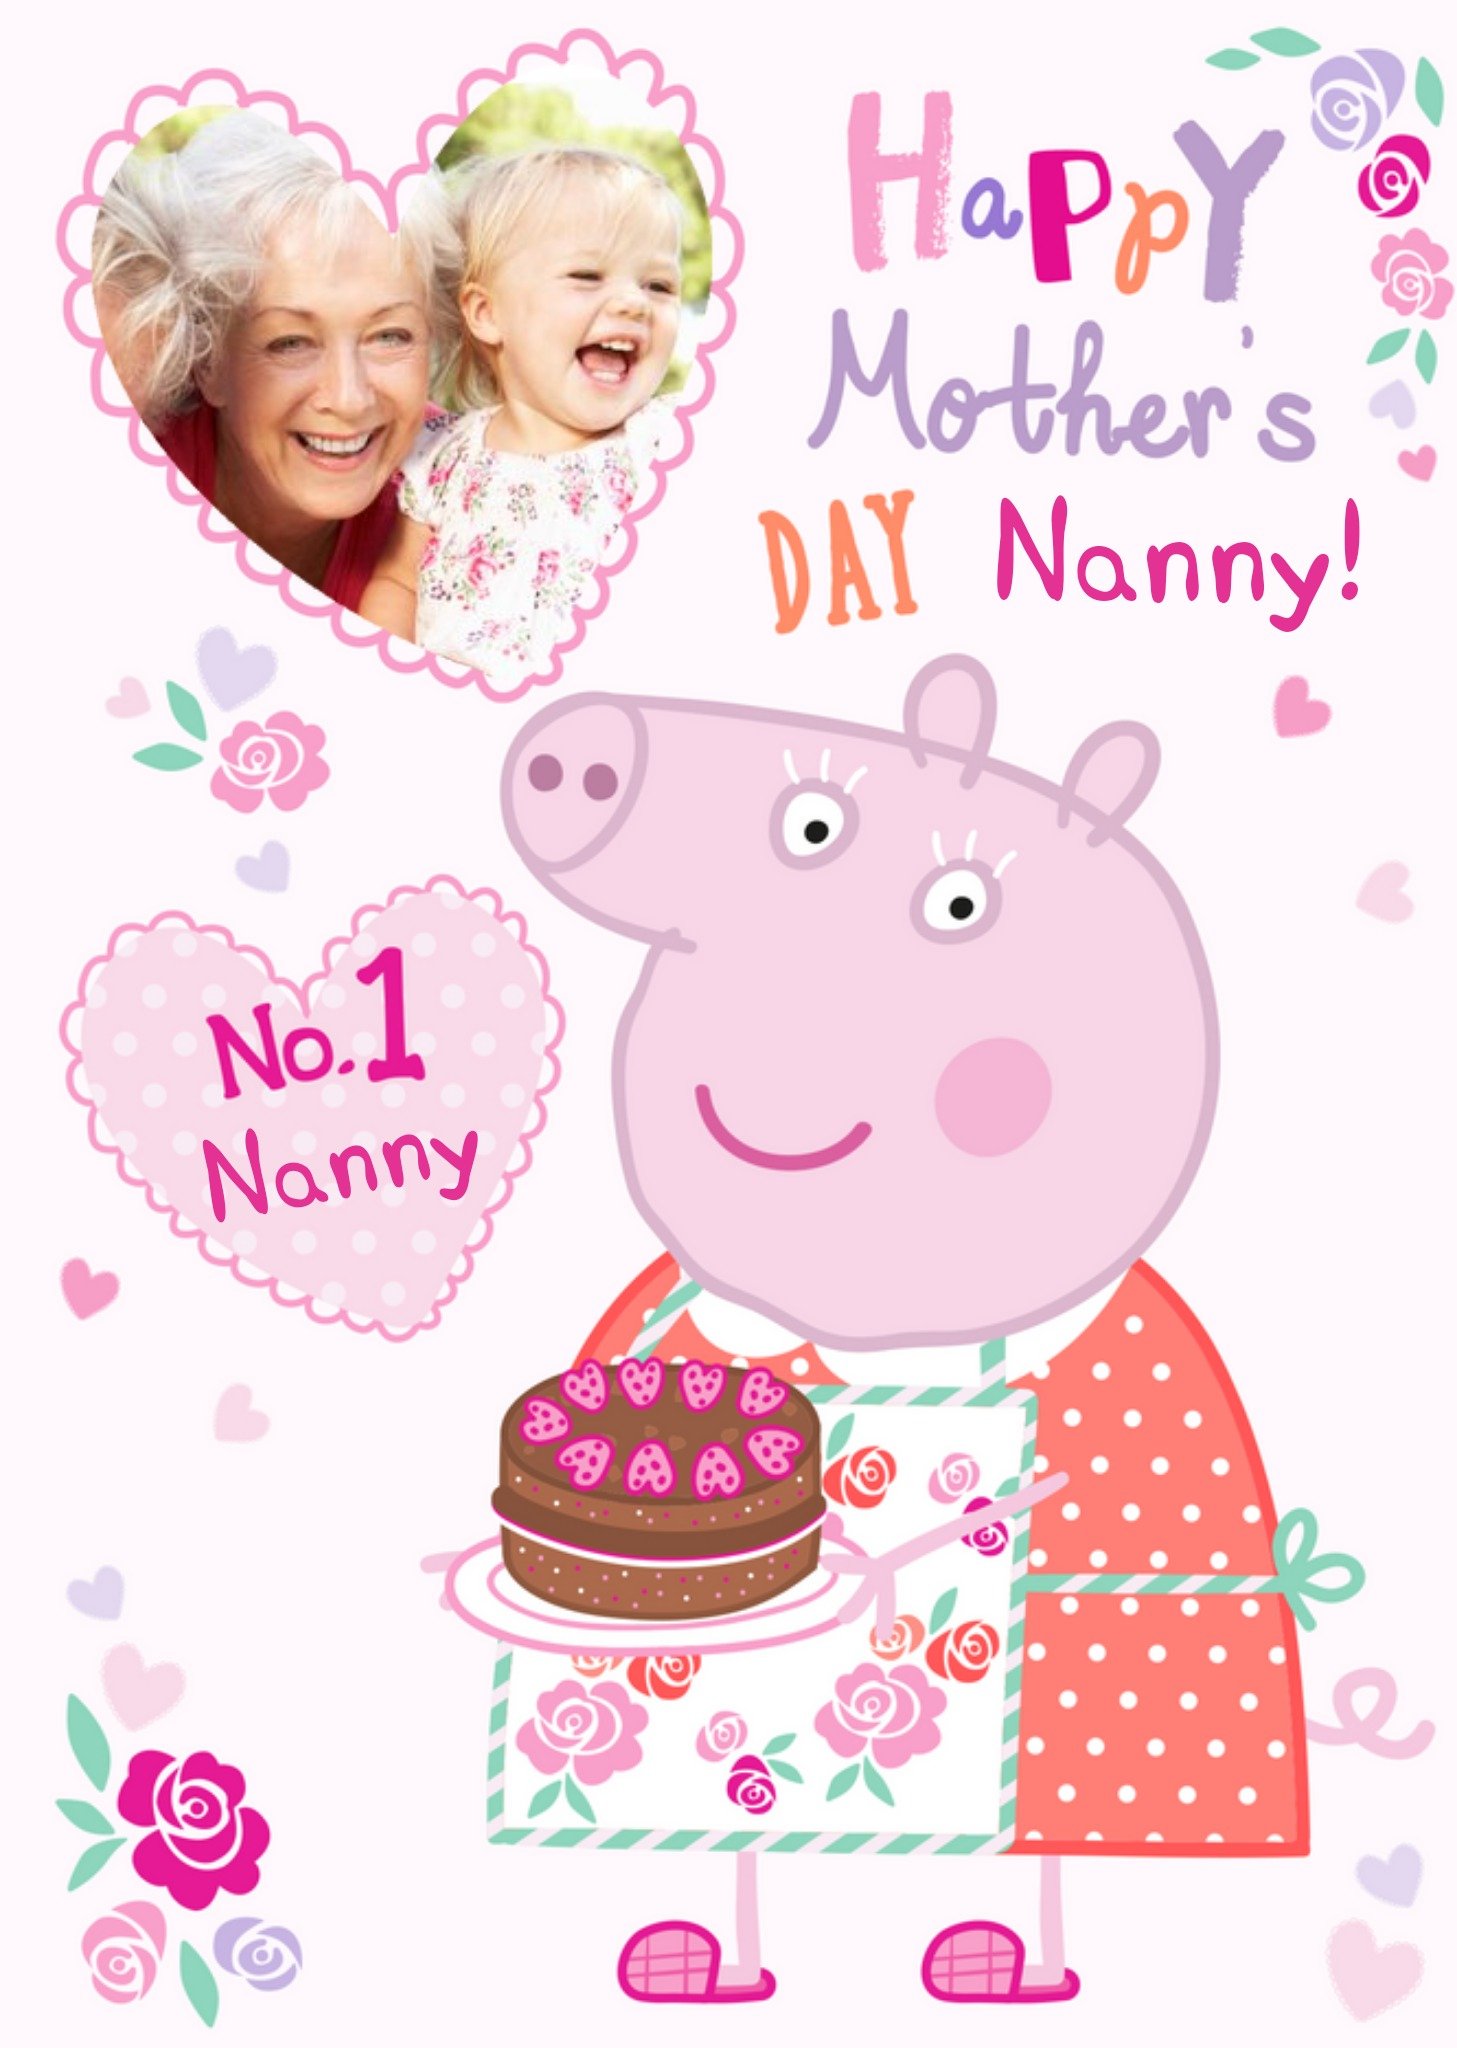 Mother's Day Card - Nanny - Peppa Pig - Photo Upload Card, Large